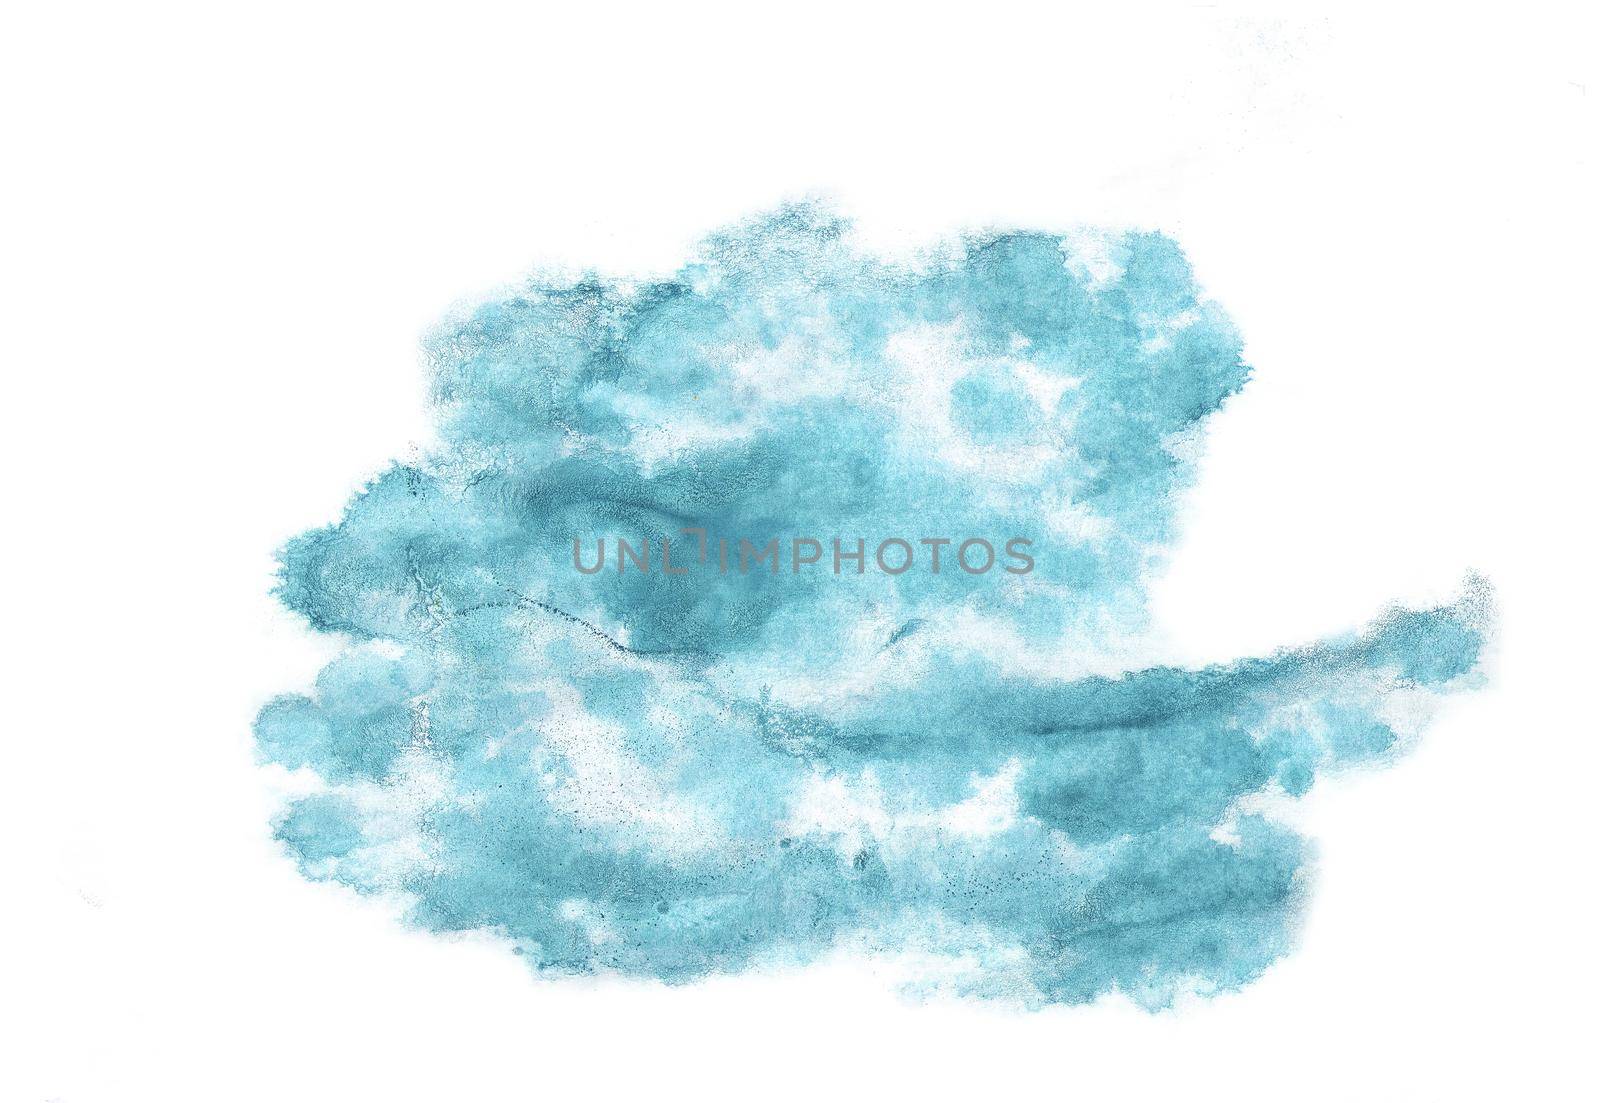 bstract blue watercolor cloud on a white background. illustration for posters, postcards, banners and creative design. by Grommik